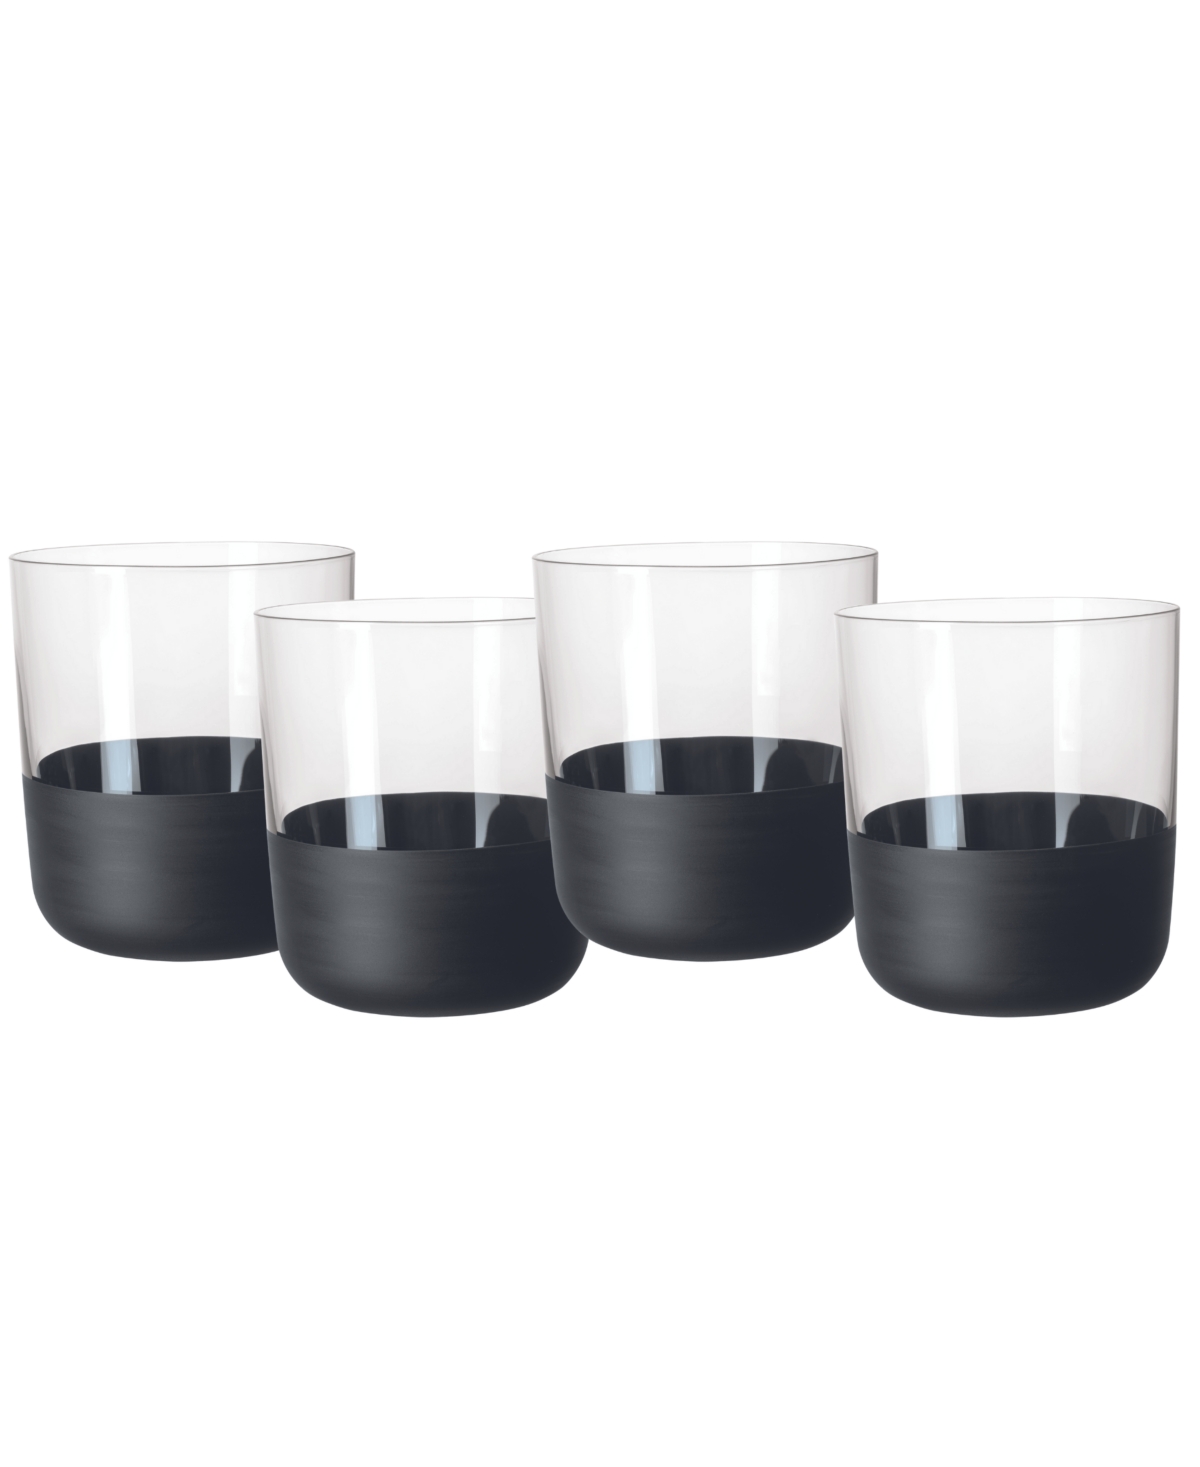 Villeroy & Boch Villeroy Boch Manufacture Rock Blanc Double Old Fashioned Glasses, Set Of 4 In Black